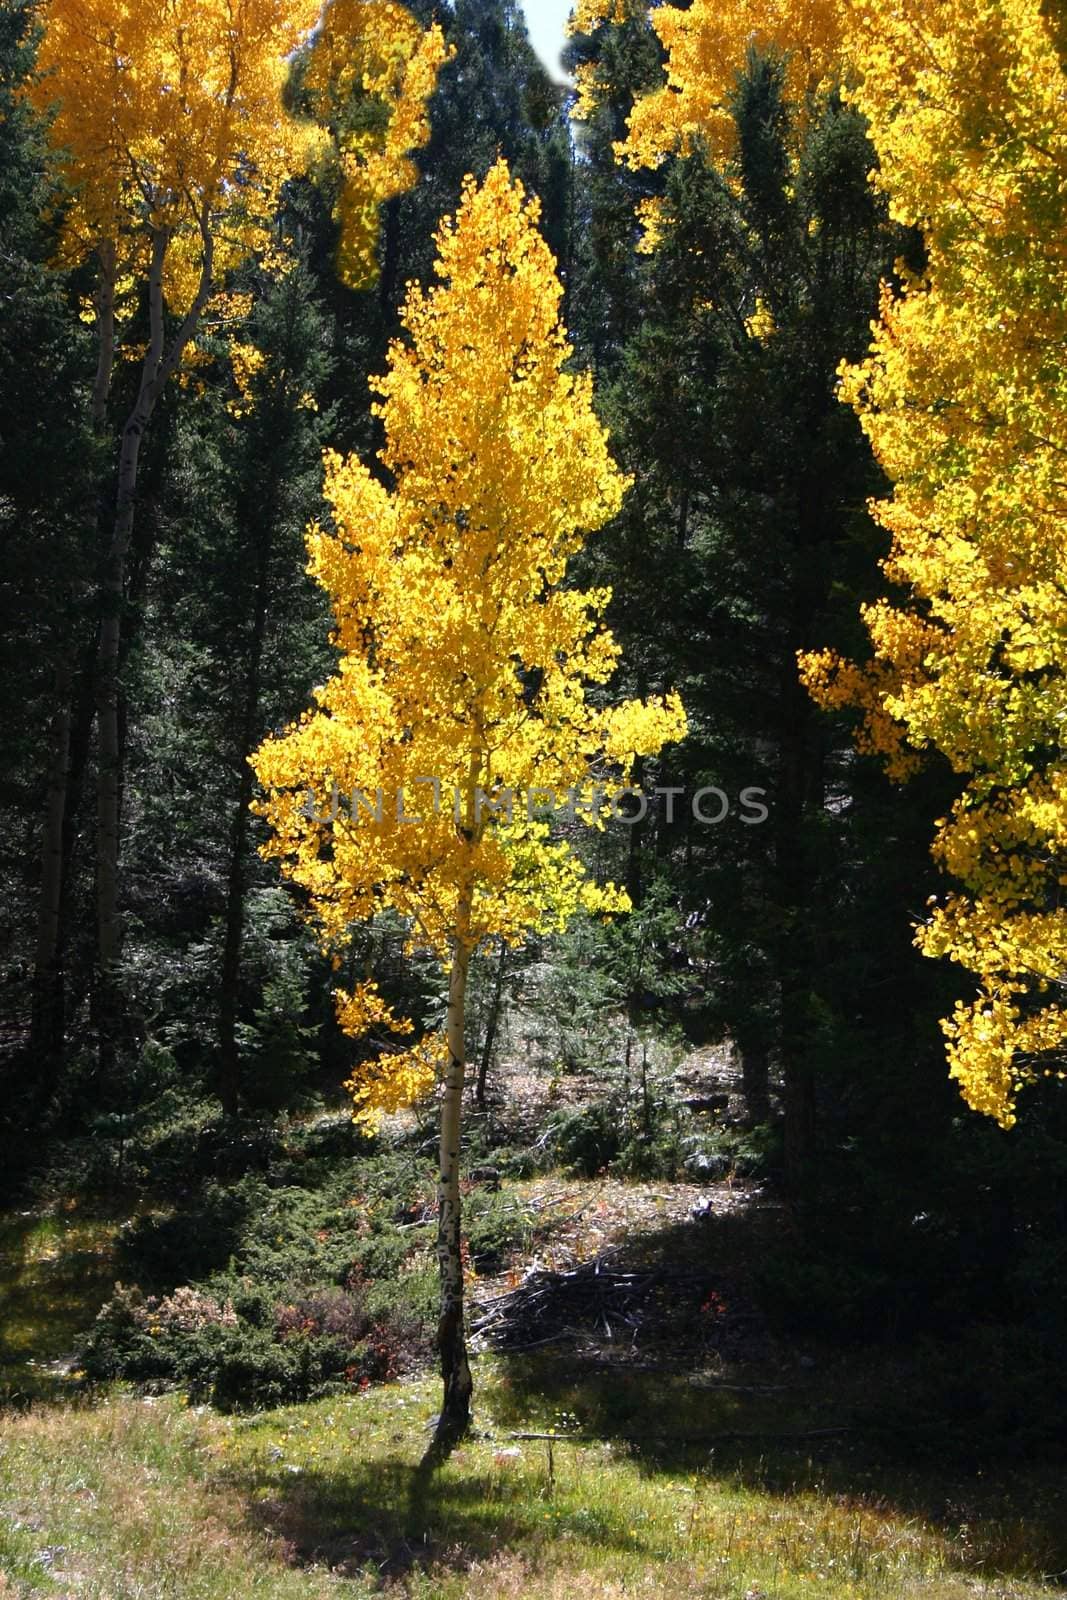 Aspens (Populus tremuloides) by Auldwhispers